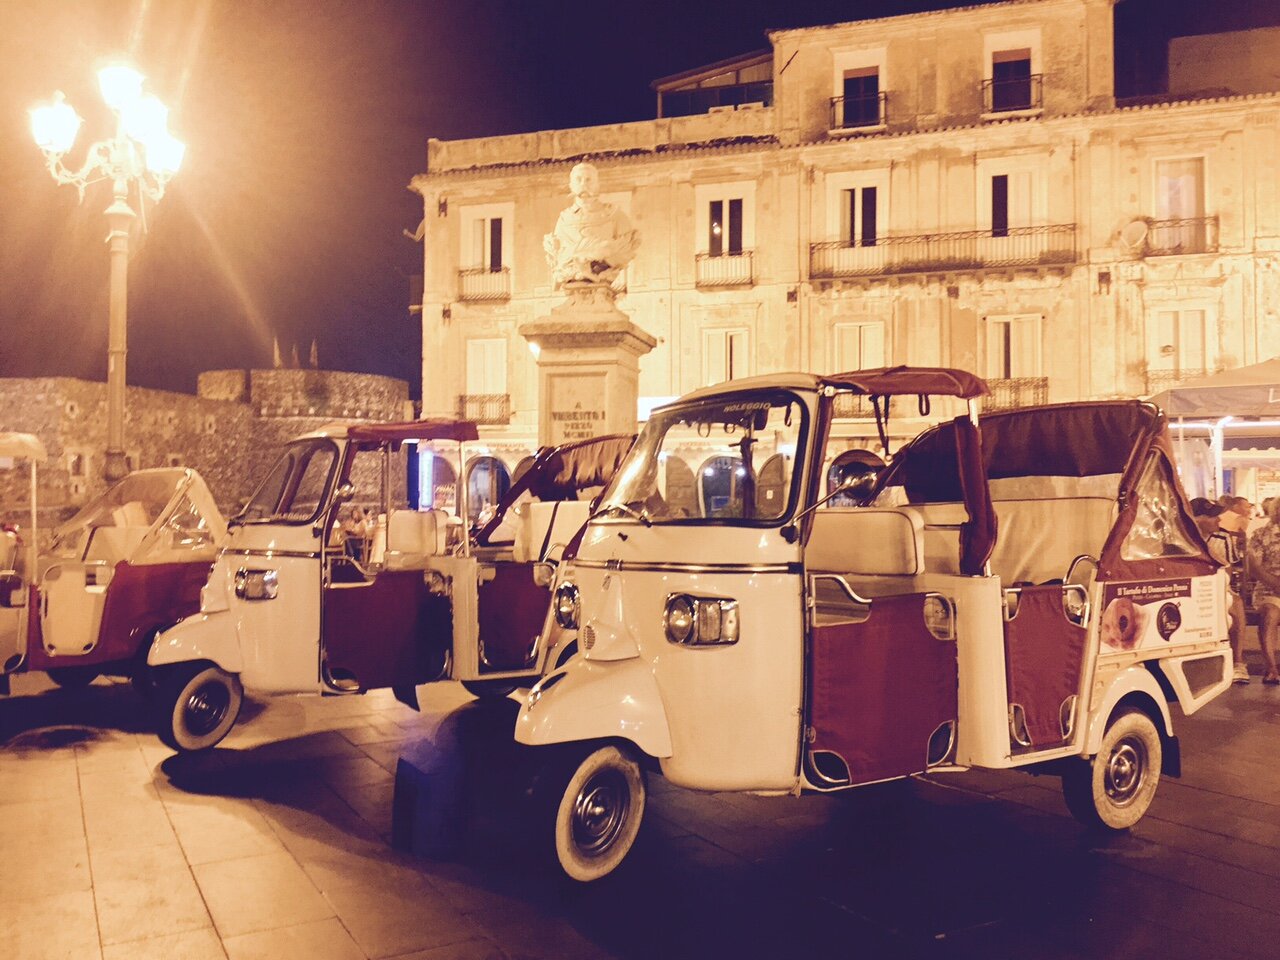 Ape taxi waiting in piazza